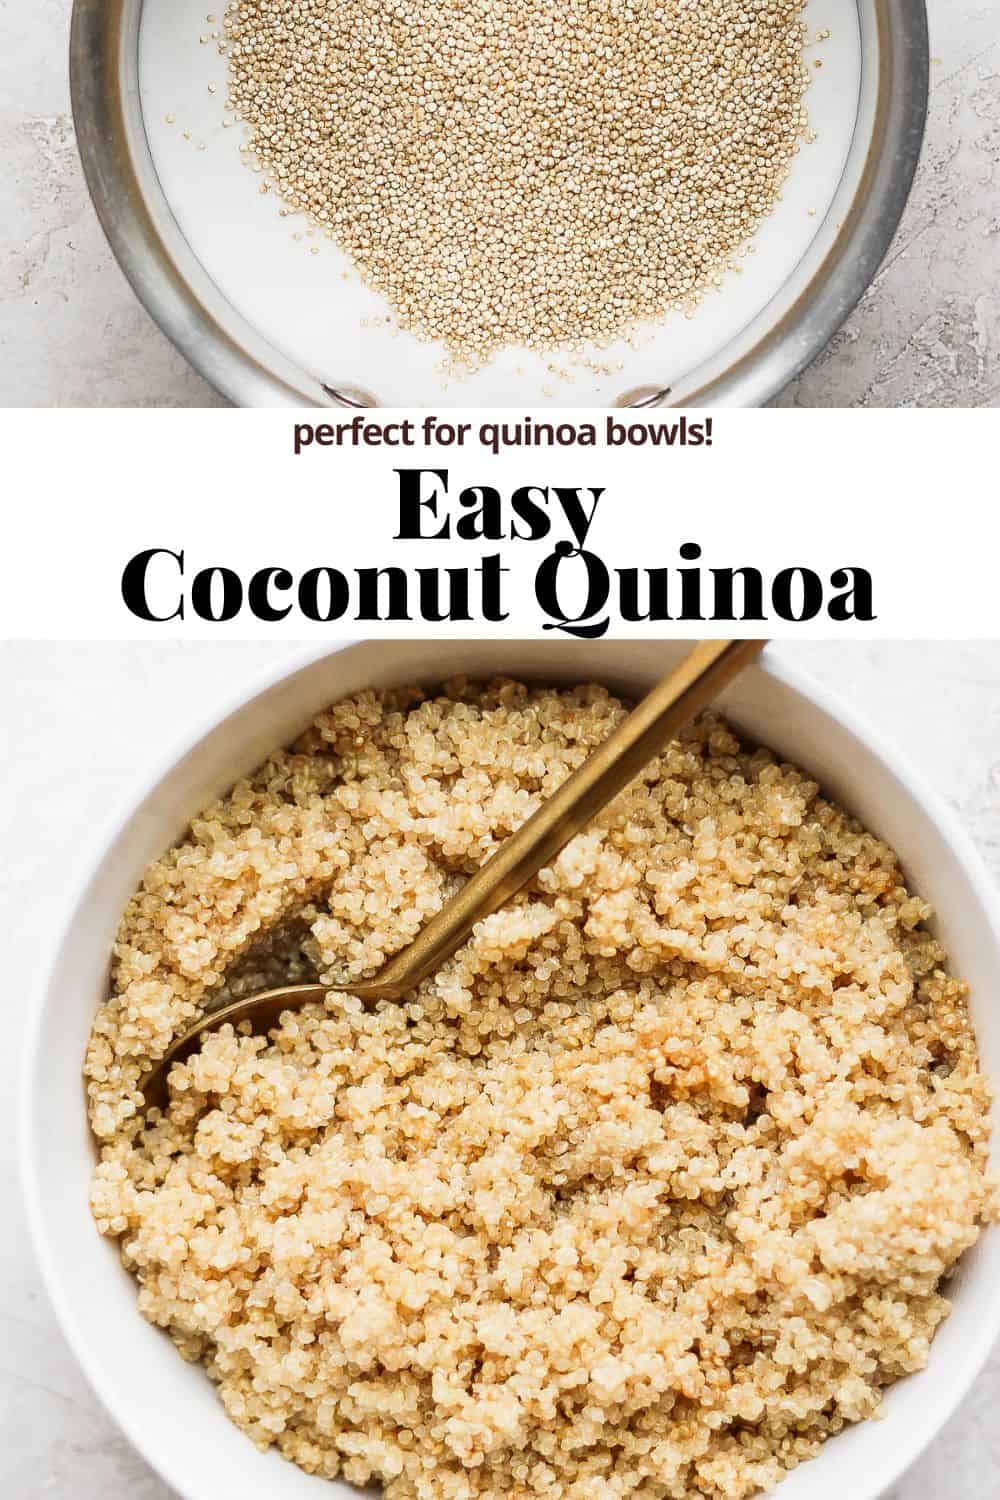 Pinterest image that shows the top image of quinoa being added to a suace pan of coconut milk, the recipe title, and then the bottom image showing fully cooked coconut quinoa in a bowl. 